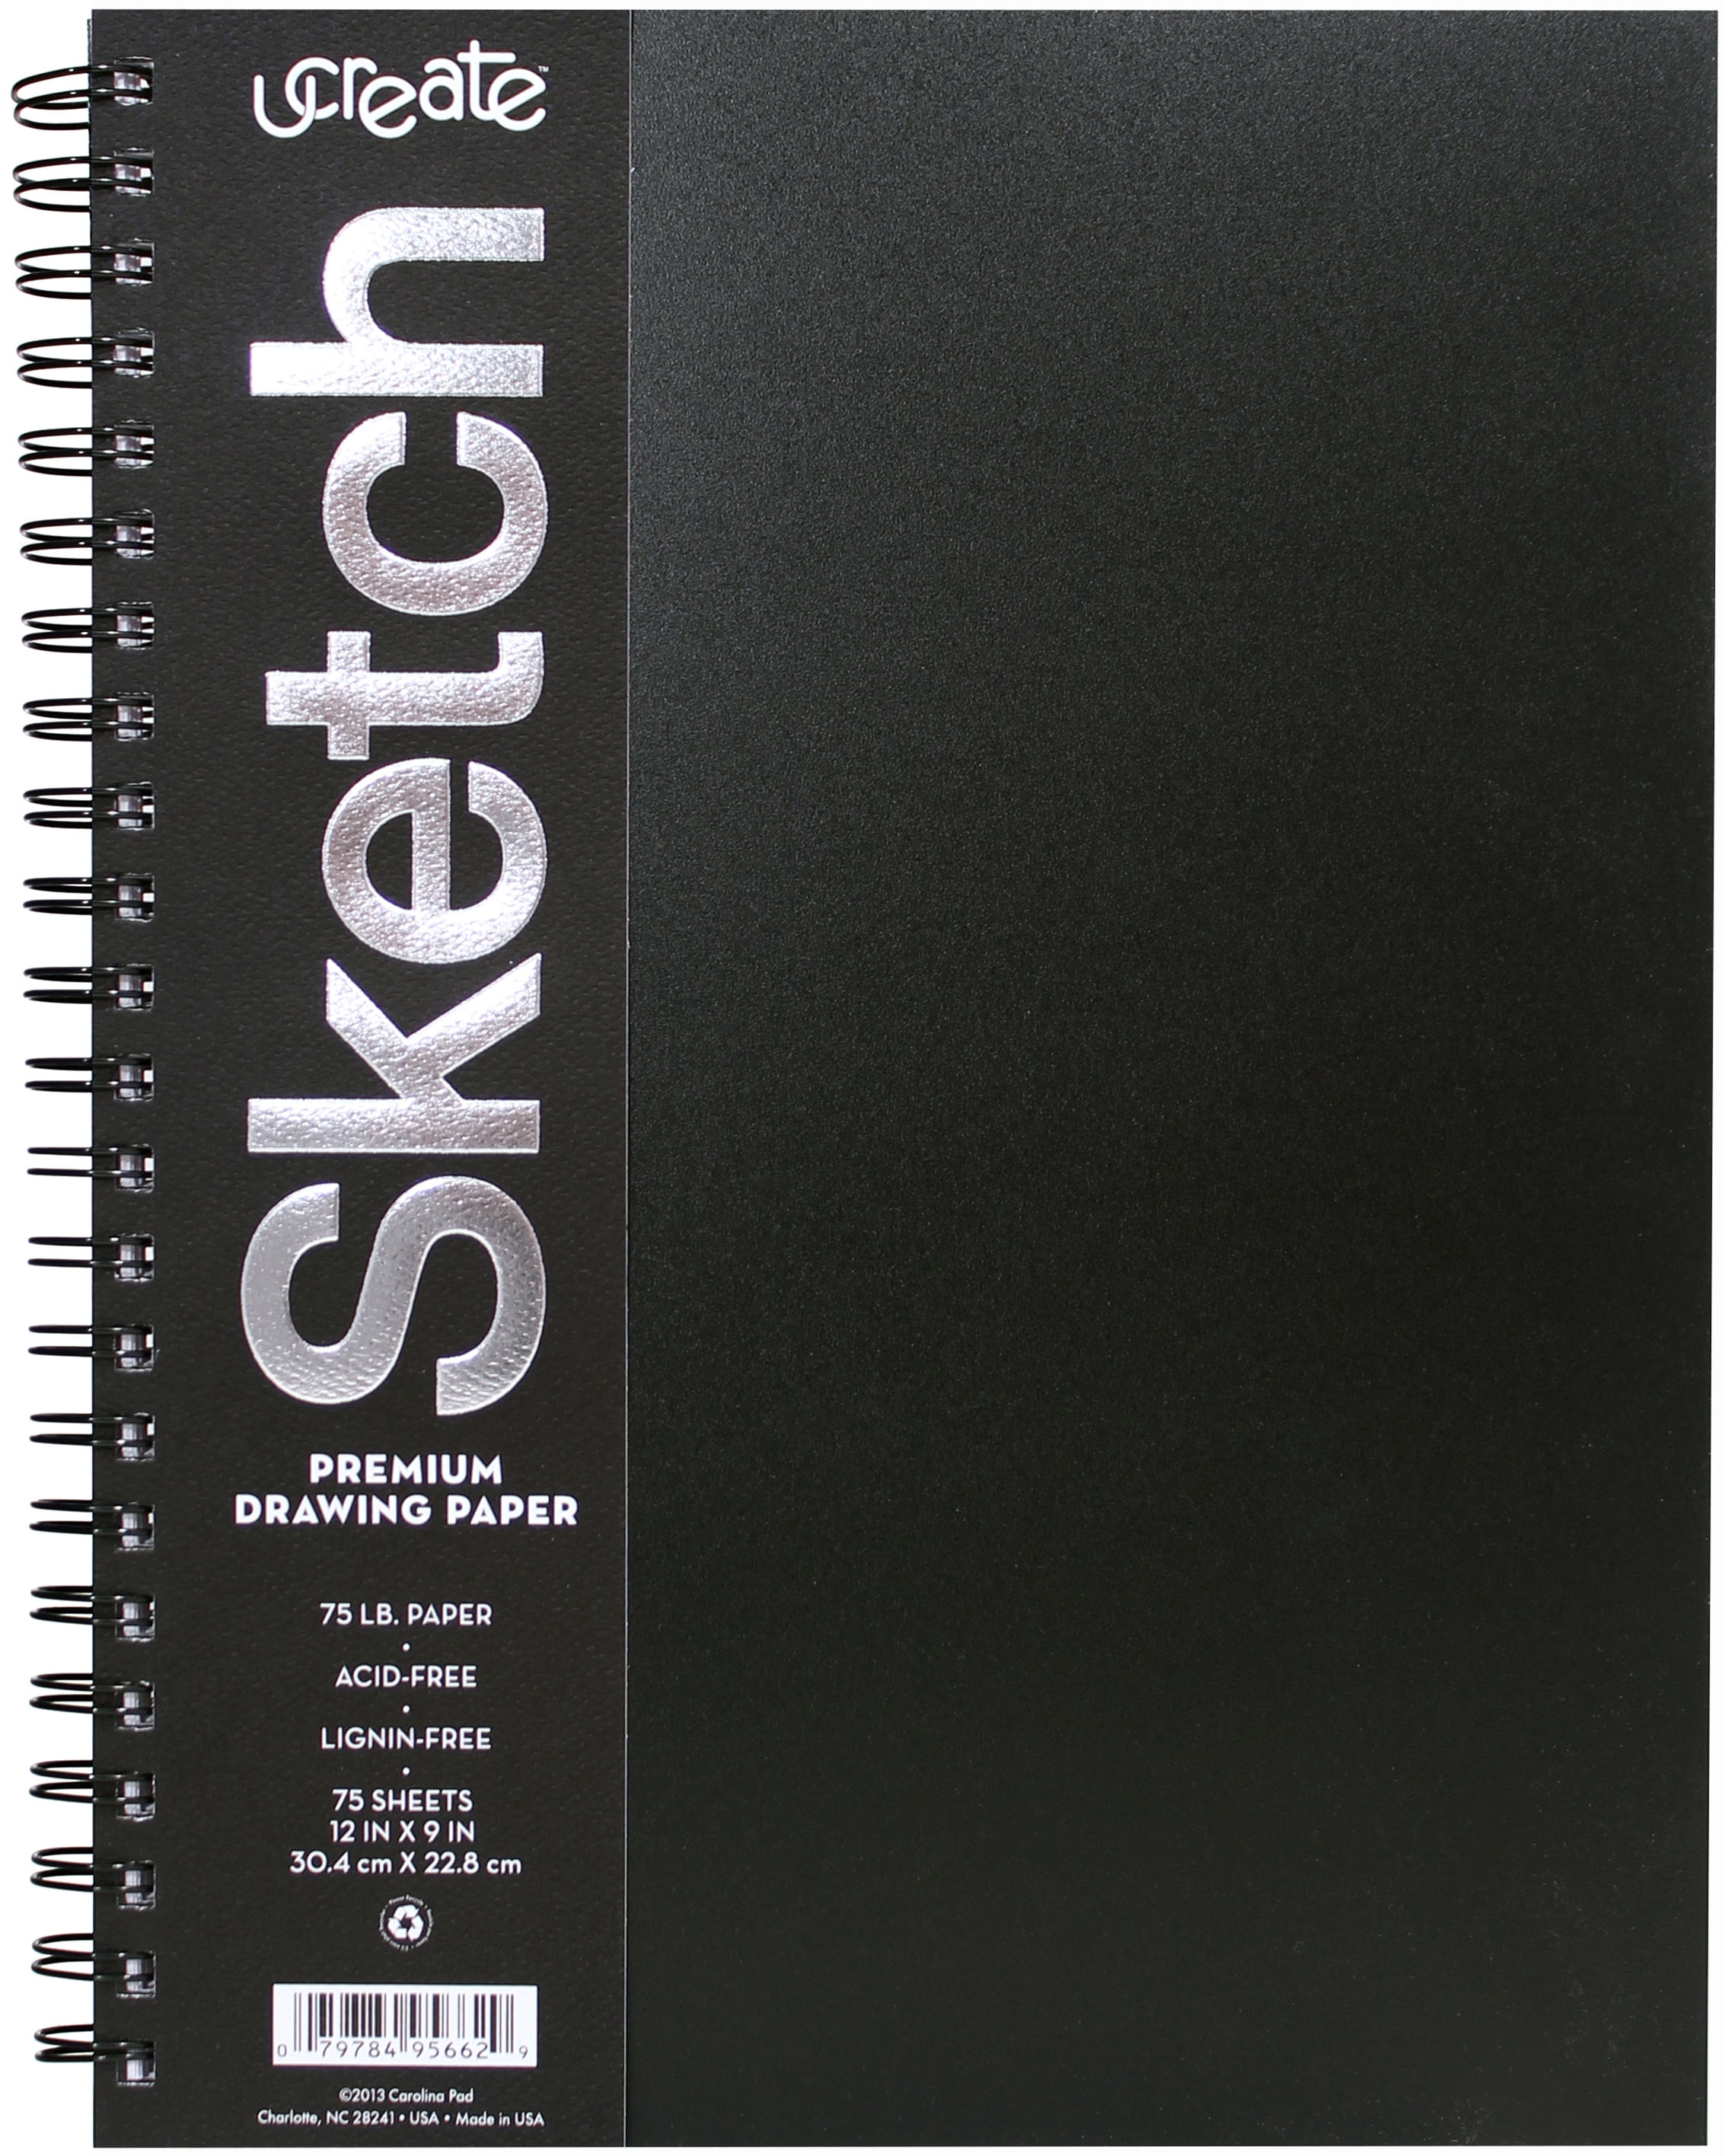 Cabreche Cute Sketchbook Top Spiral Bound Sketch Pad 9 x 12 inch,100GSM  Thick Paper 50 Sheets 100 Pages,Art Sketch Book Aesthetic Writing Drawing